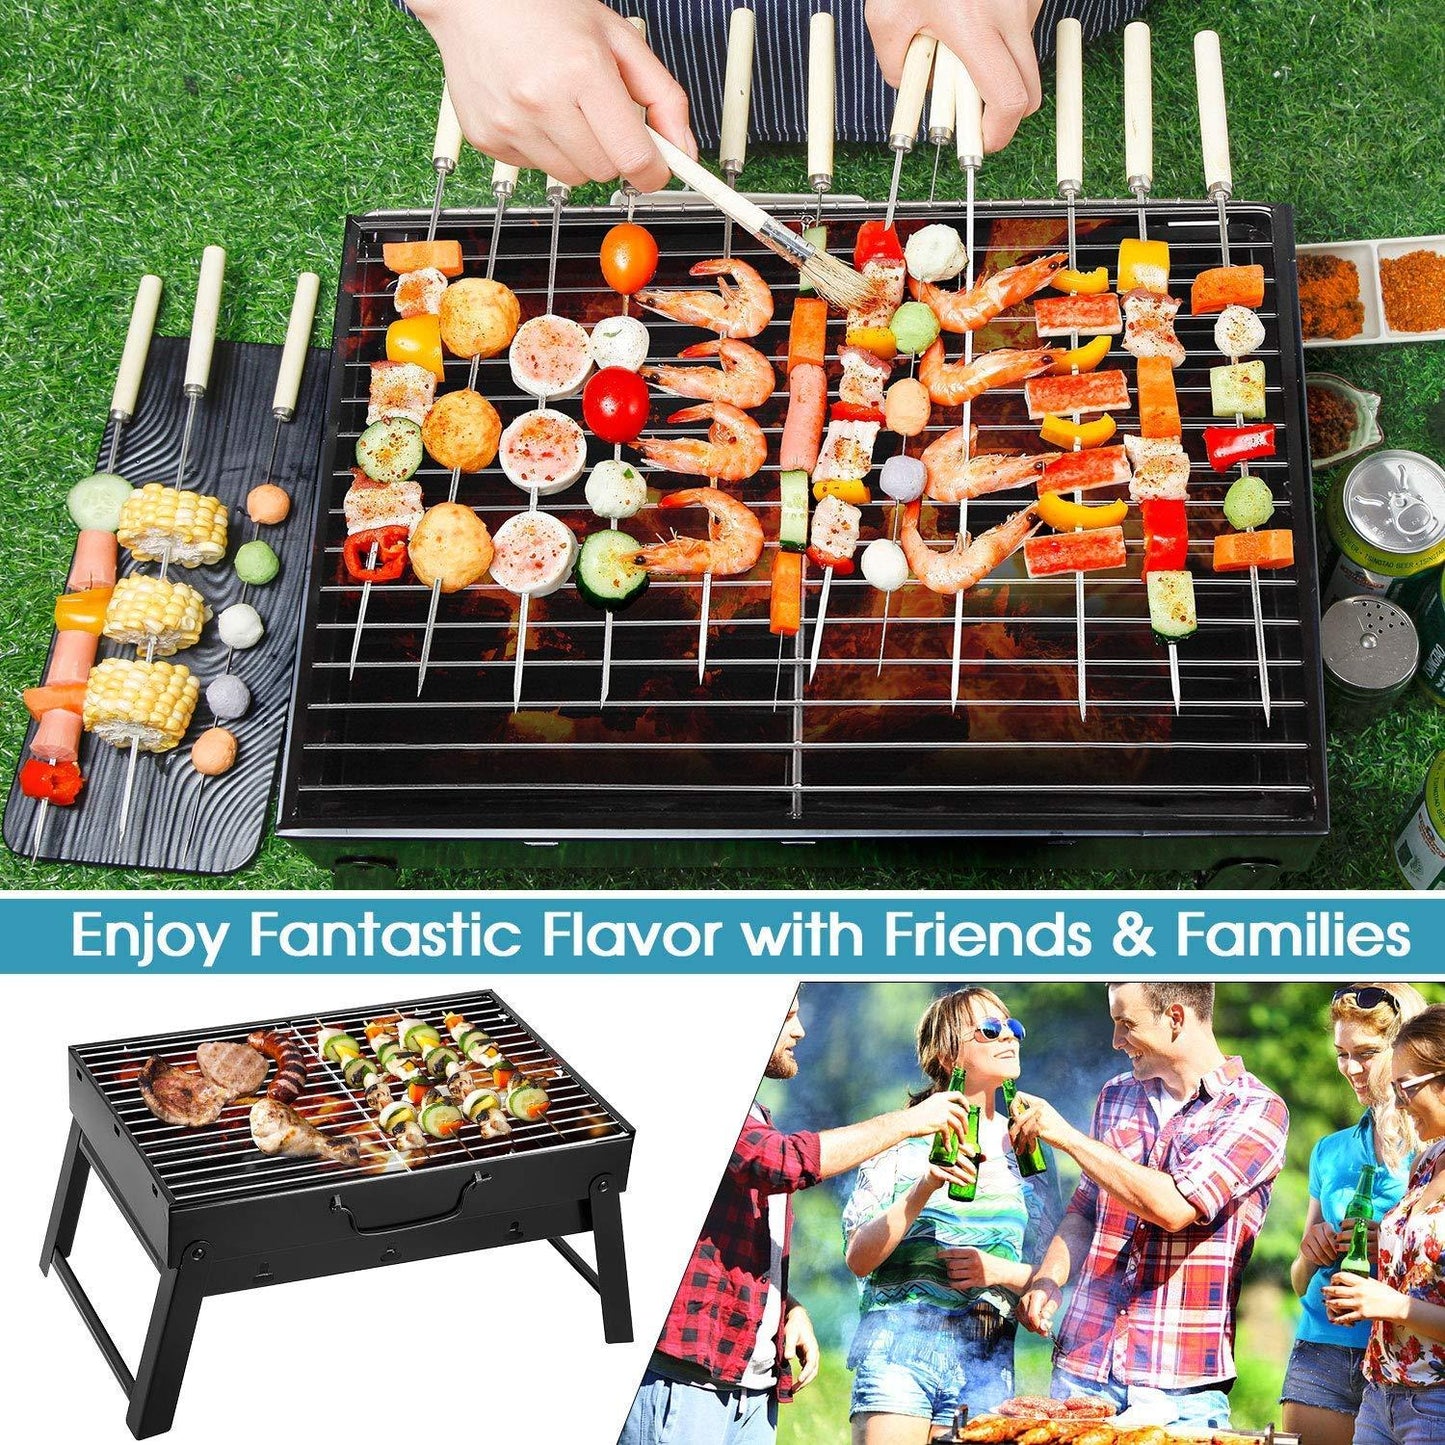 Folding Portable Barbecue Charcoal Grill, Barbecue Desk Tabletop Outdoor Stainless Steel Smoker BBQ for Outdoor Cooking Camping Picnics Beach (M1) - CookCave